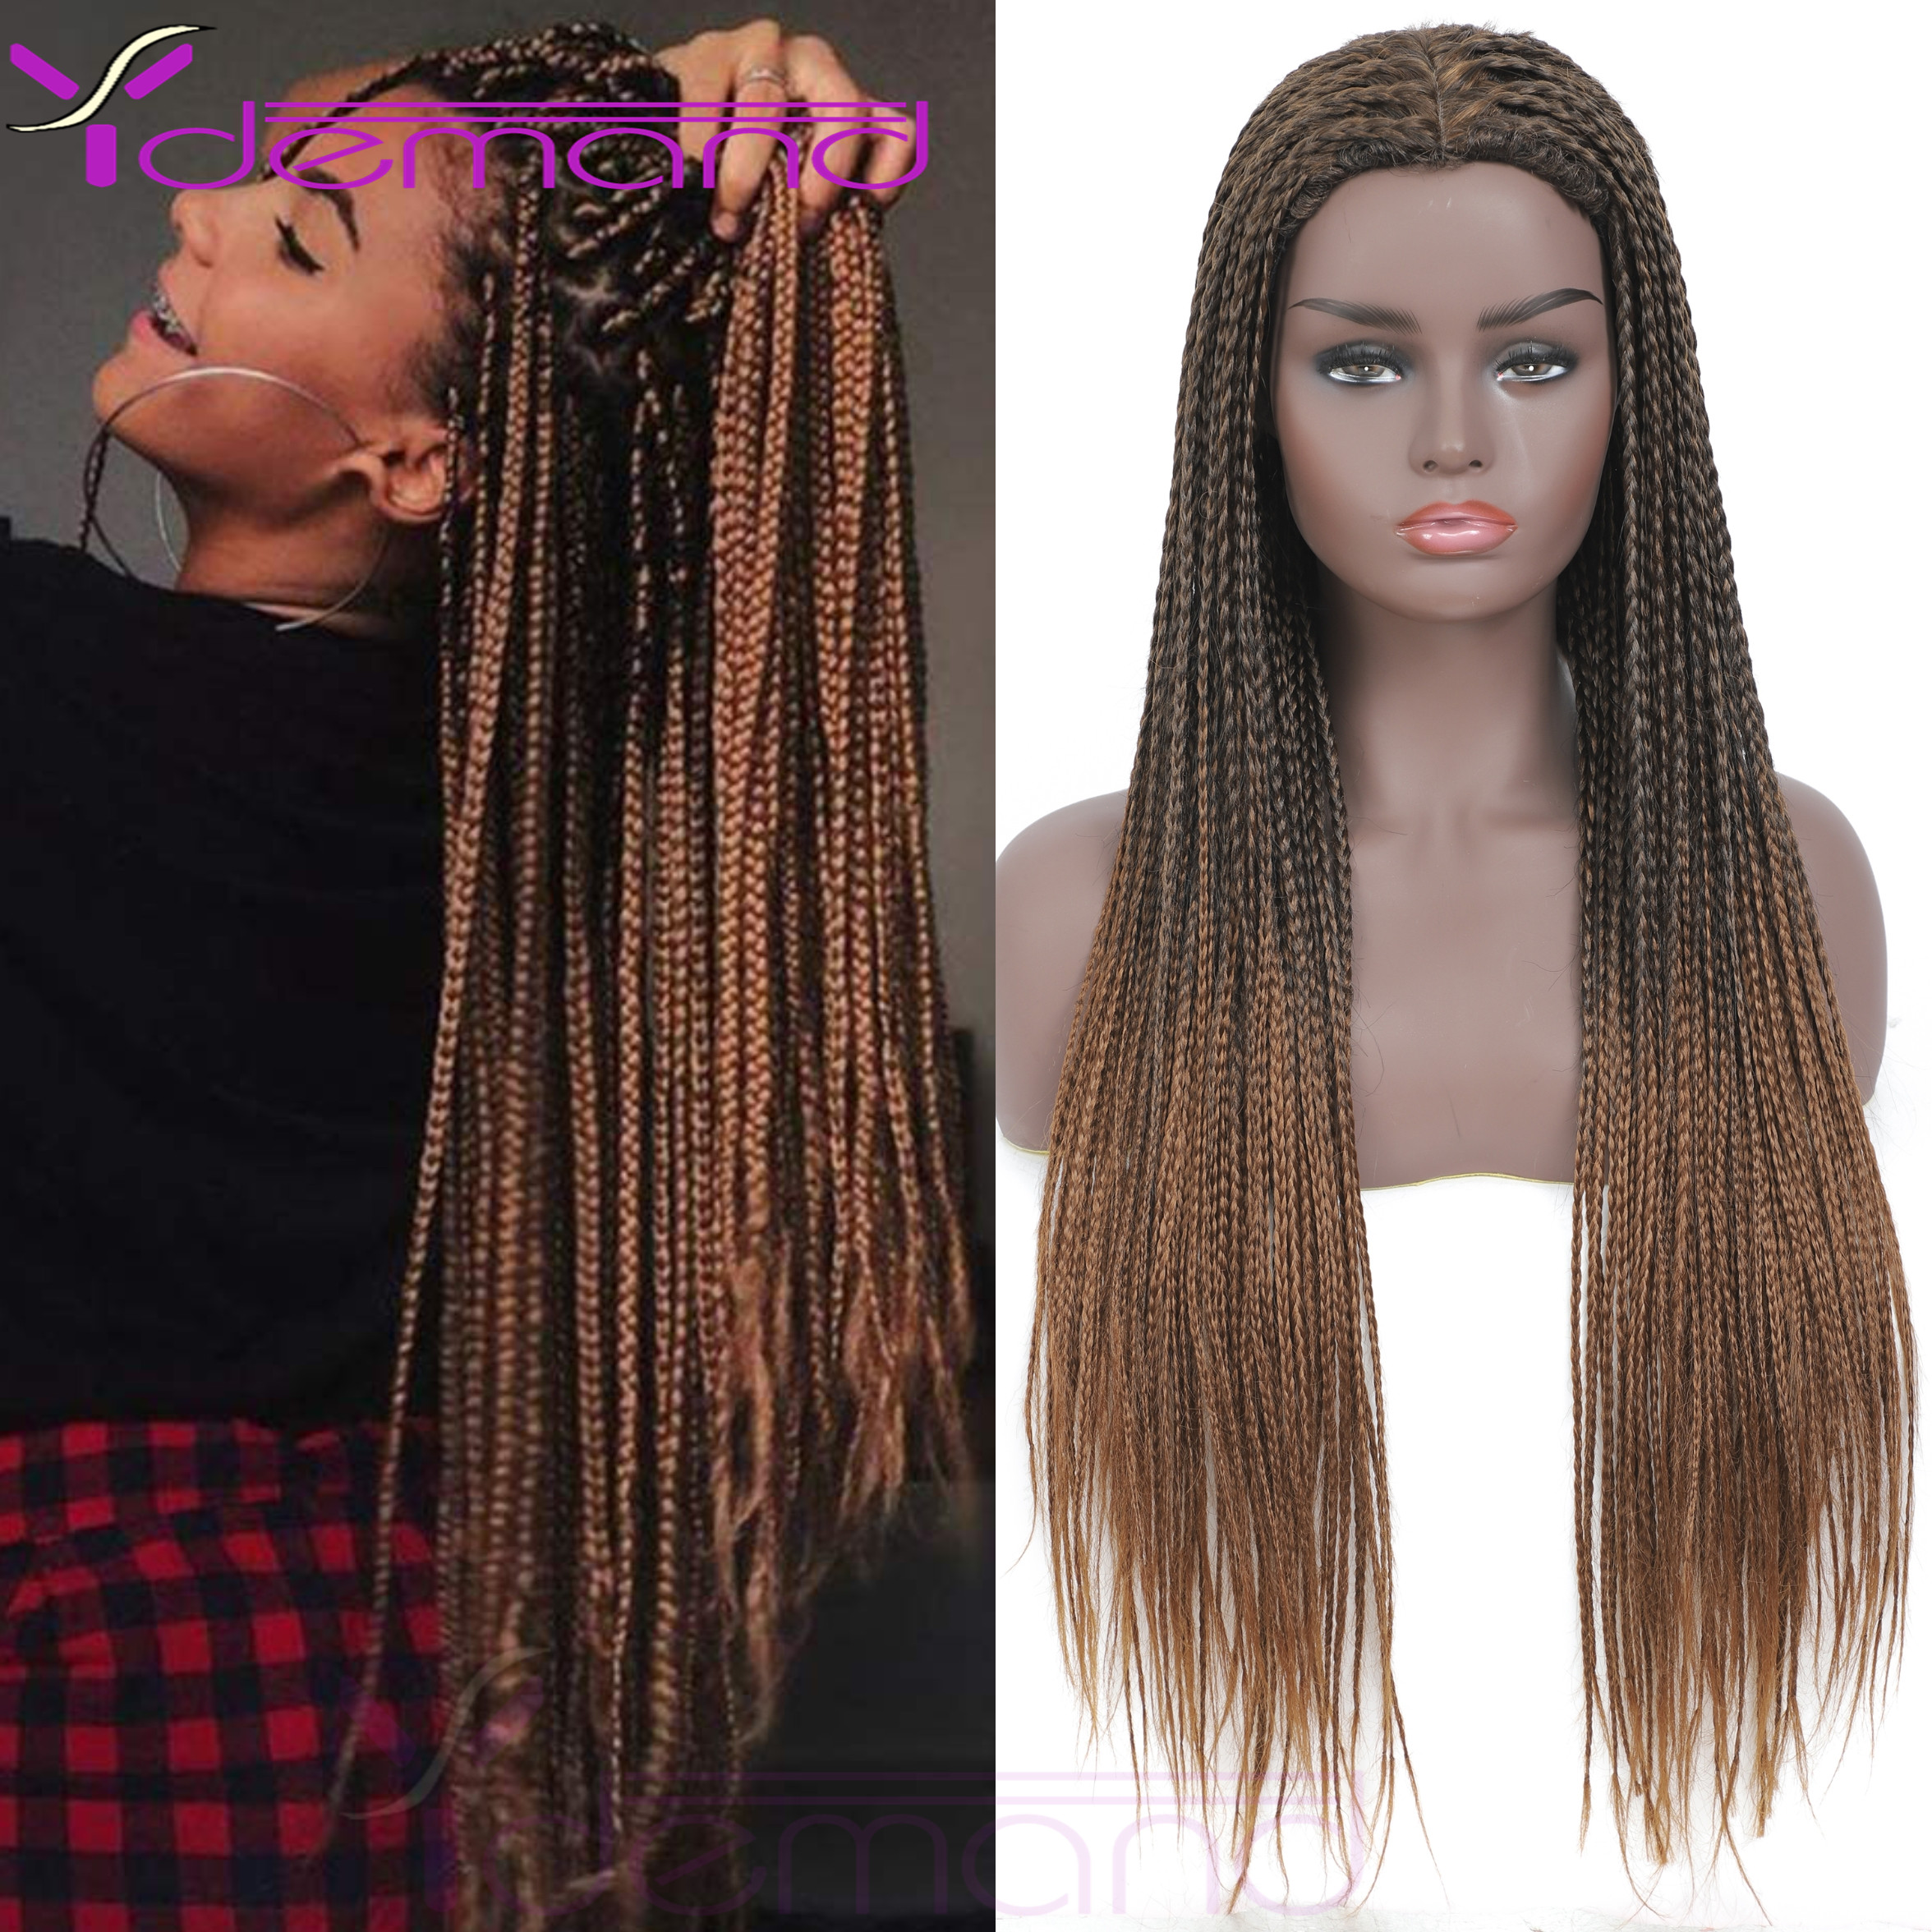 Y Demand Black Ombre-Brown Braided Wigs For Black Women Or Men Synthetic Wig Crochet Hair Braids  With BOX 2021 New